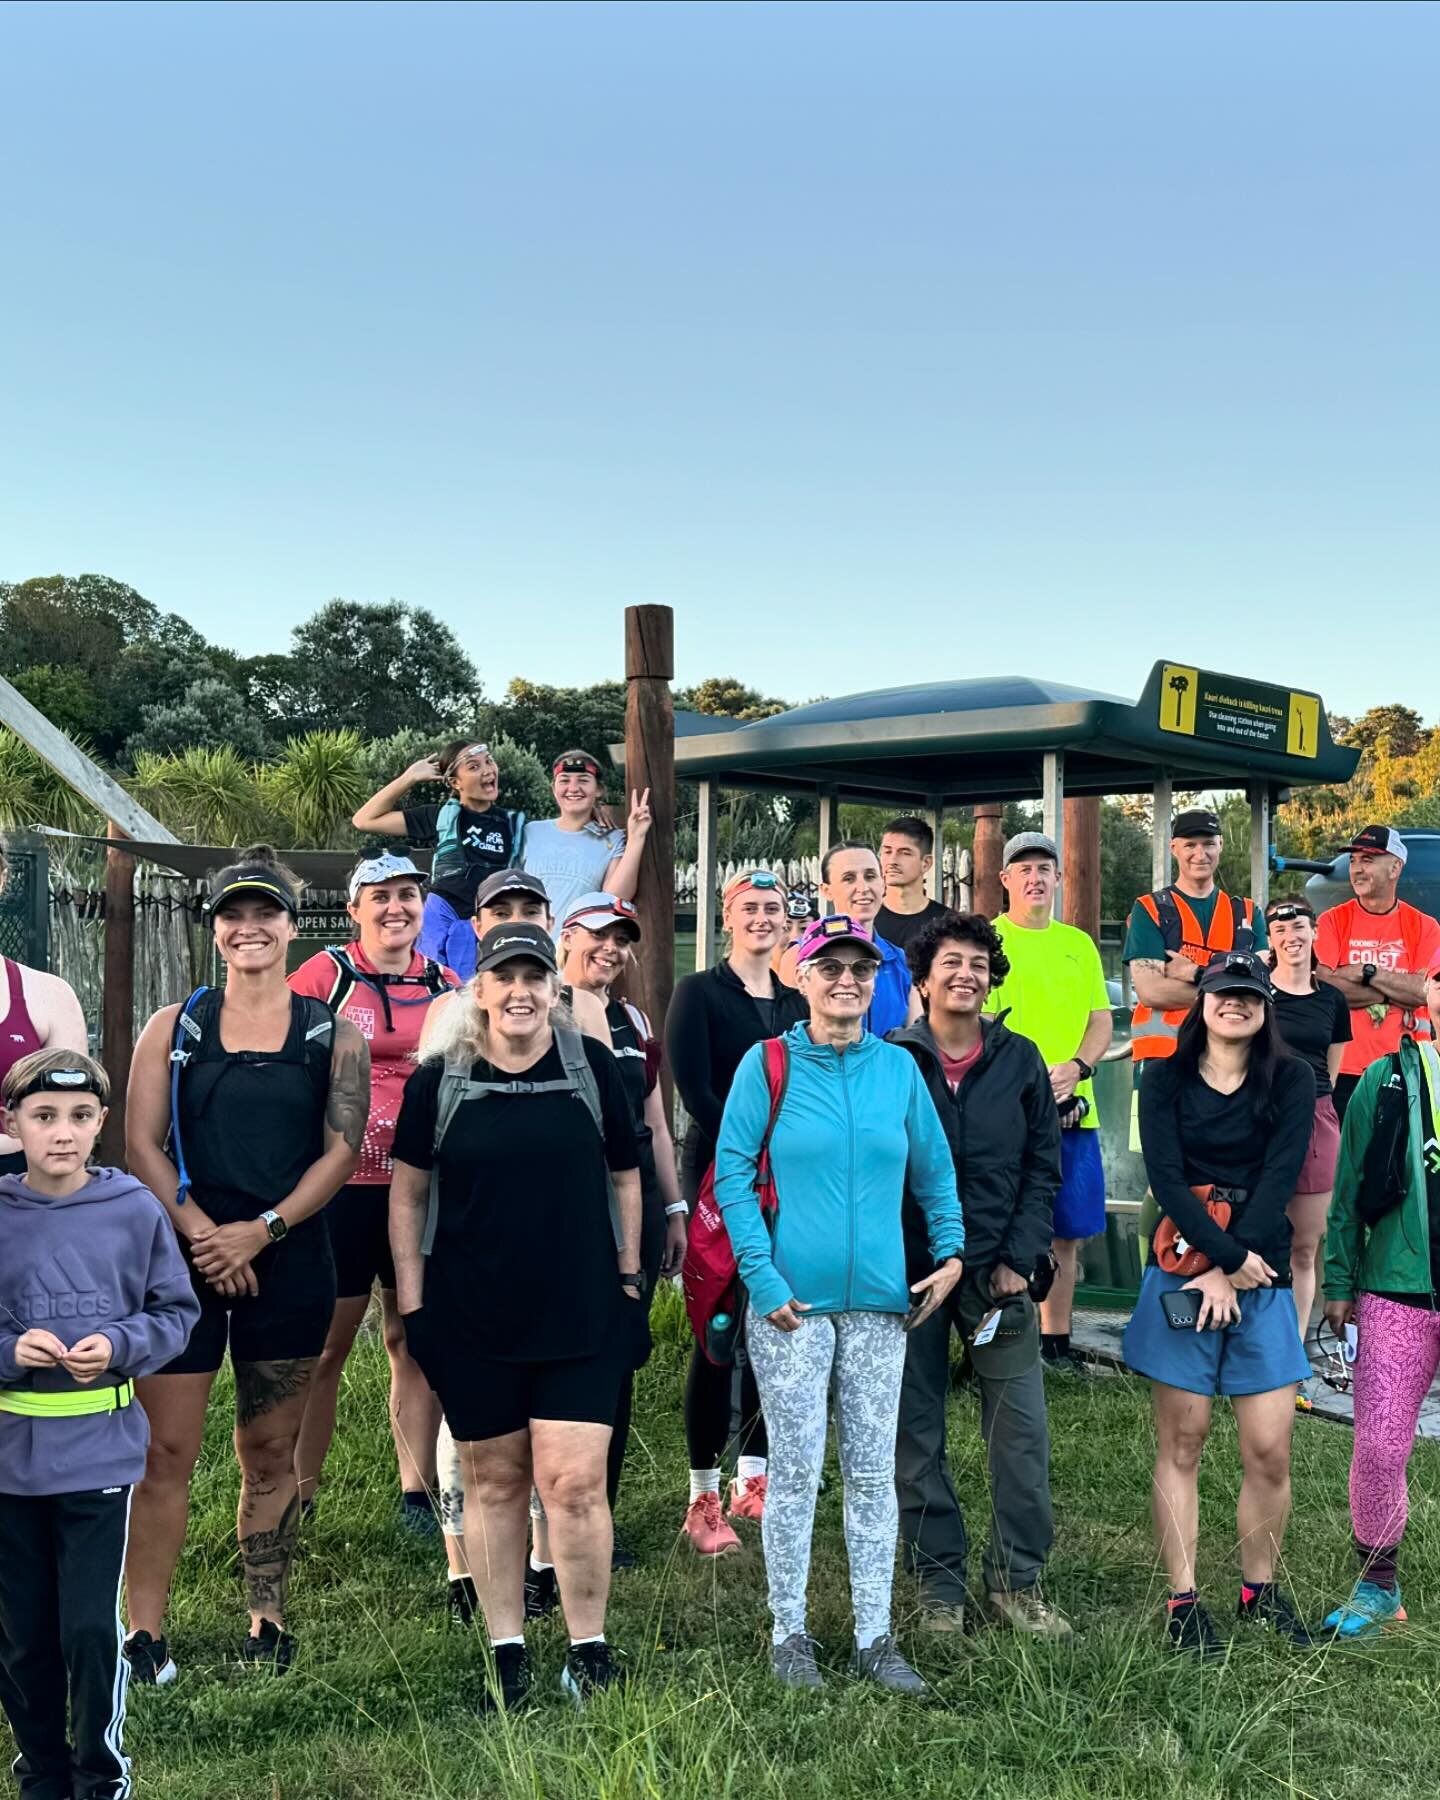 What an amazing night walk/run we put on for our community 💕 getting people into the gorgeous trails is our jam x thanks to our volunteers for helping xx Coach Maree.

#communityrun #shakespearregionalpark #trailrunning #trailwalking #merrell